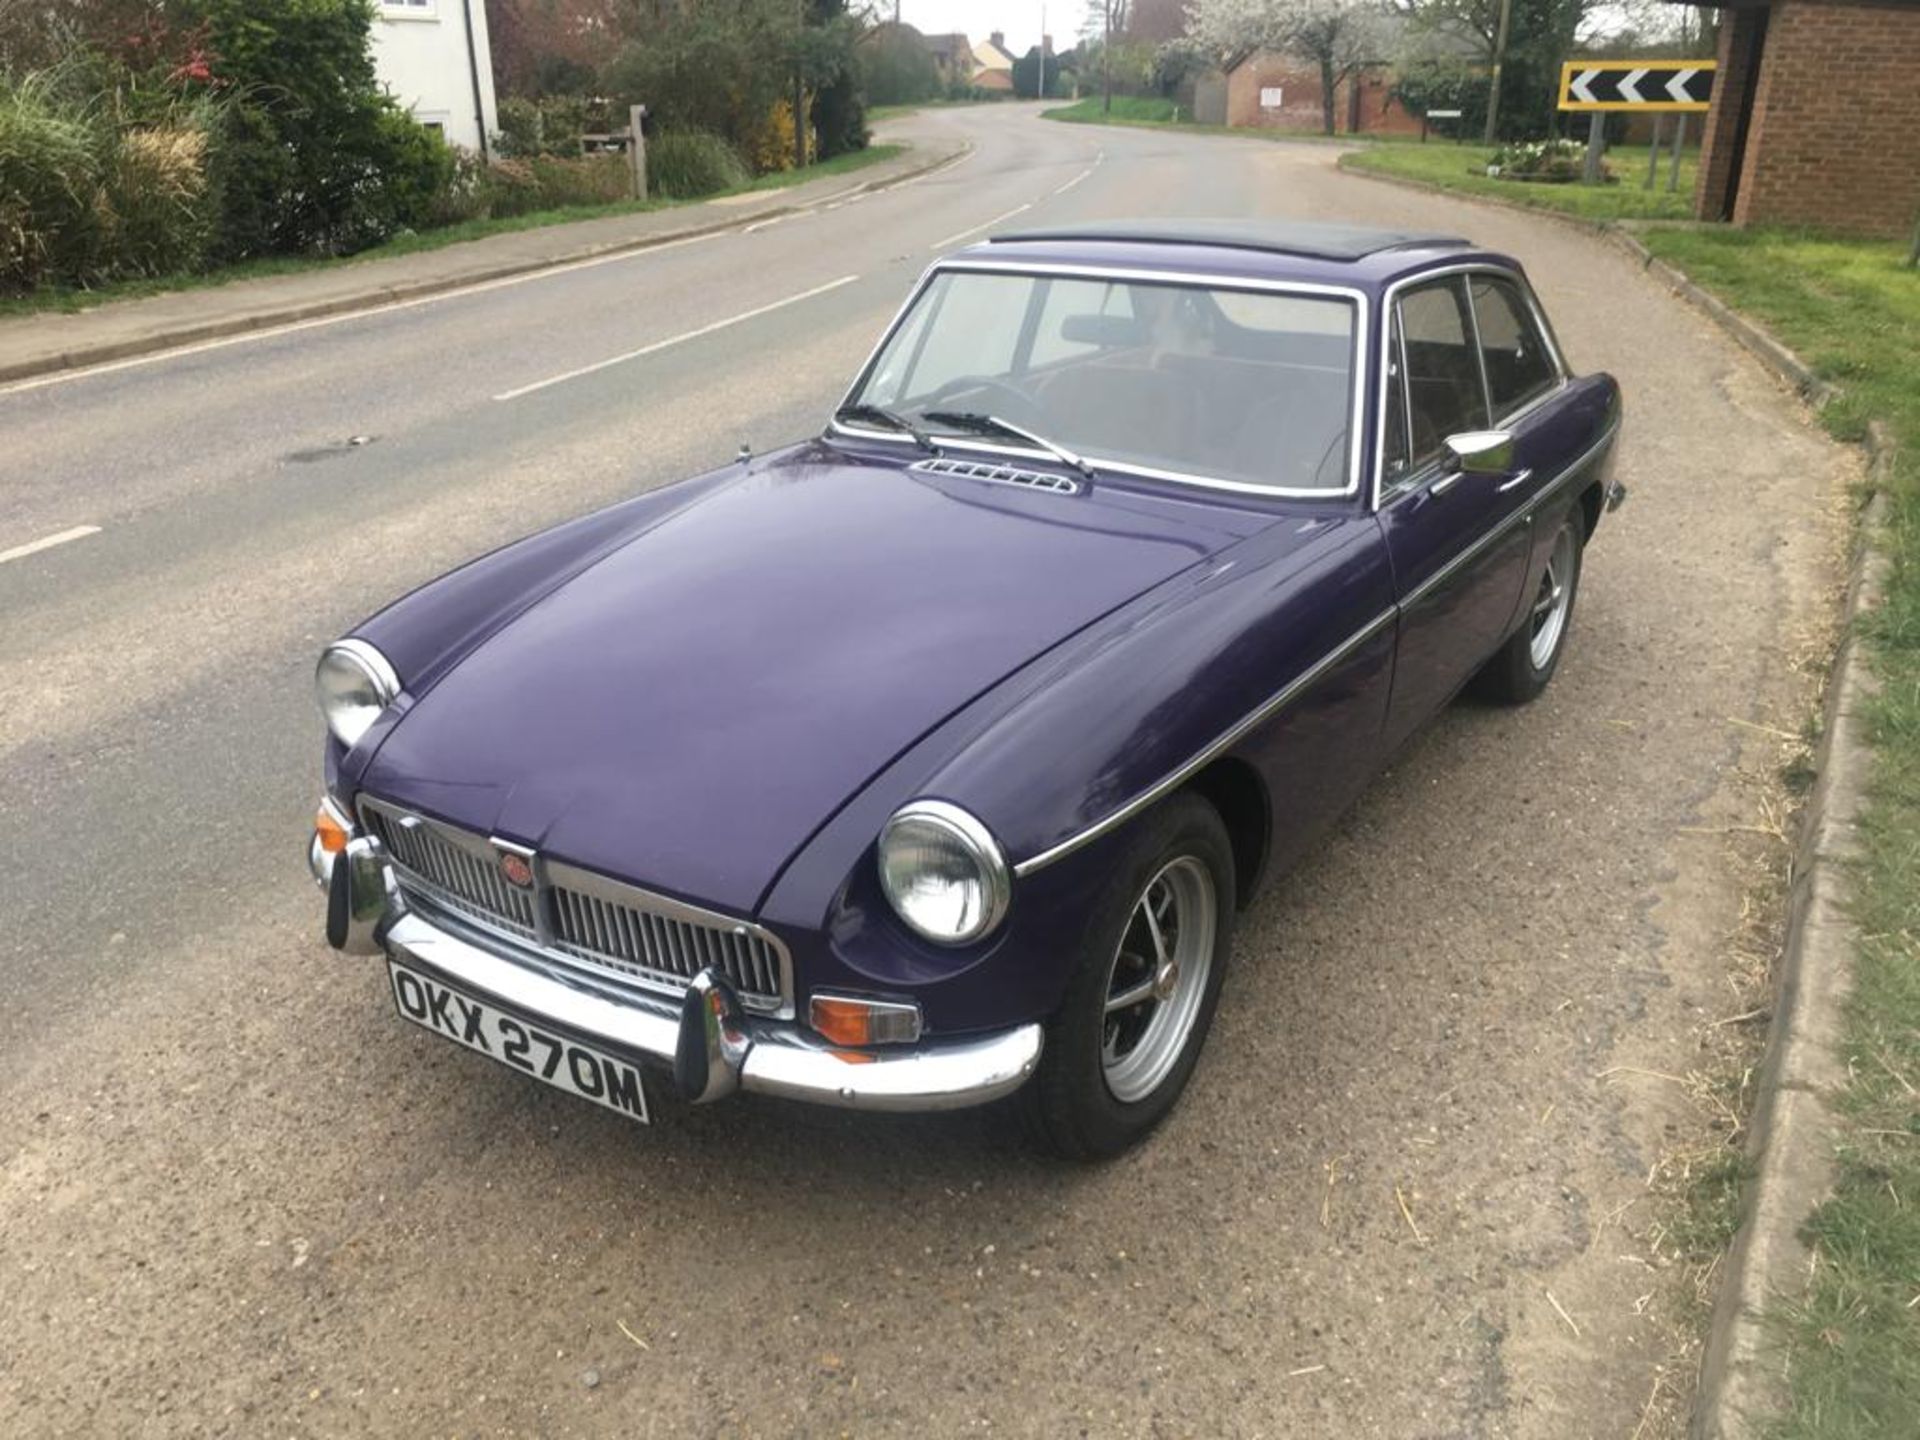 1974 MG B GT COUPE - Image 3 of 22